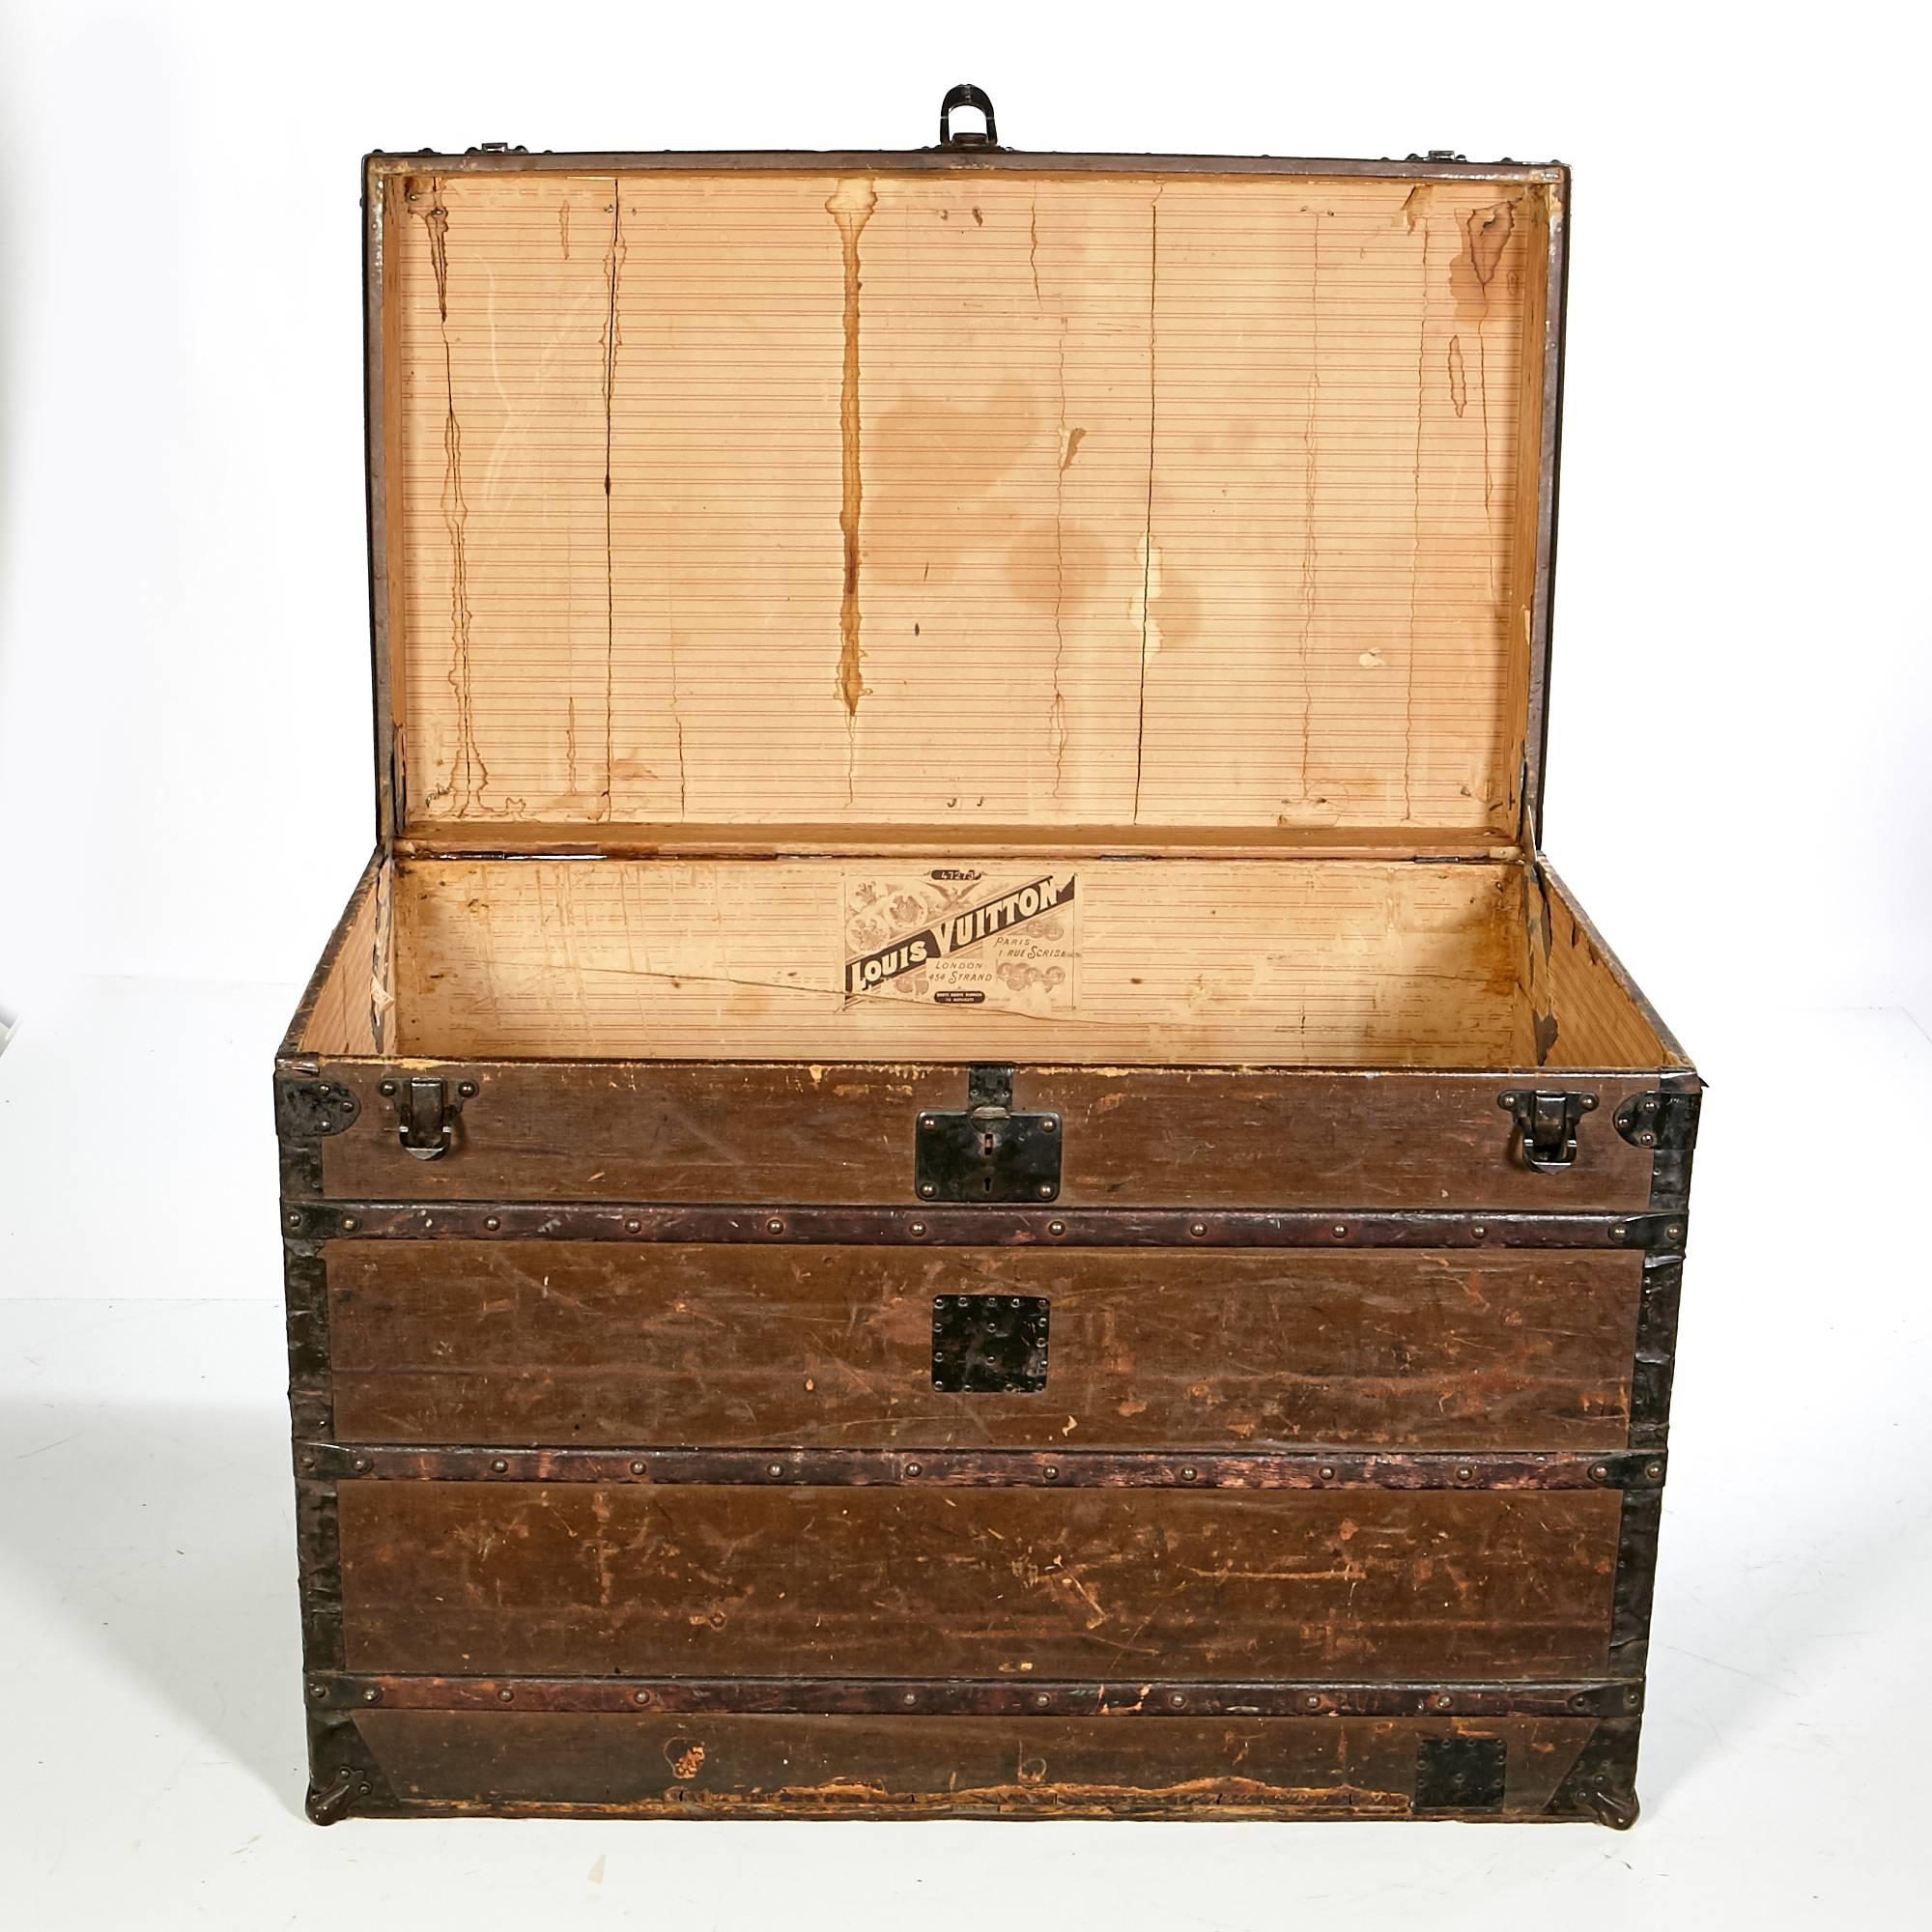 Metal Early Louis Vuitton Wood Strap-Bound and Iron-Mounted Steamer Trunk